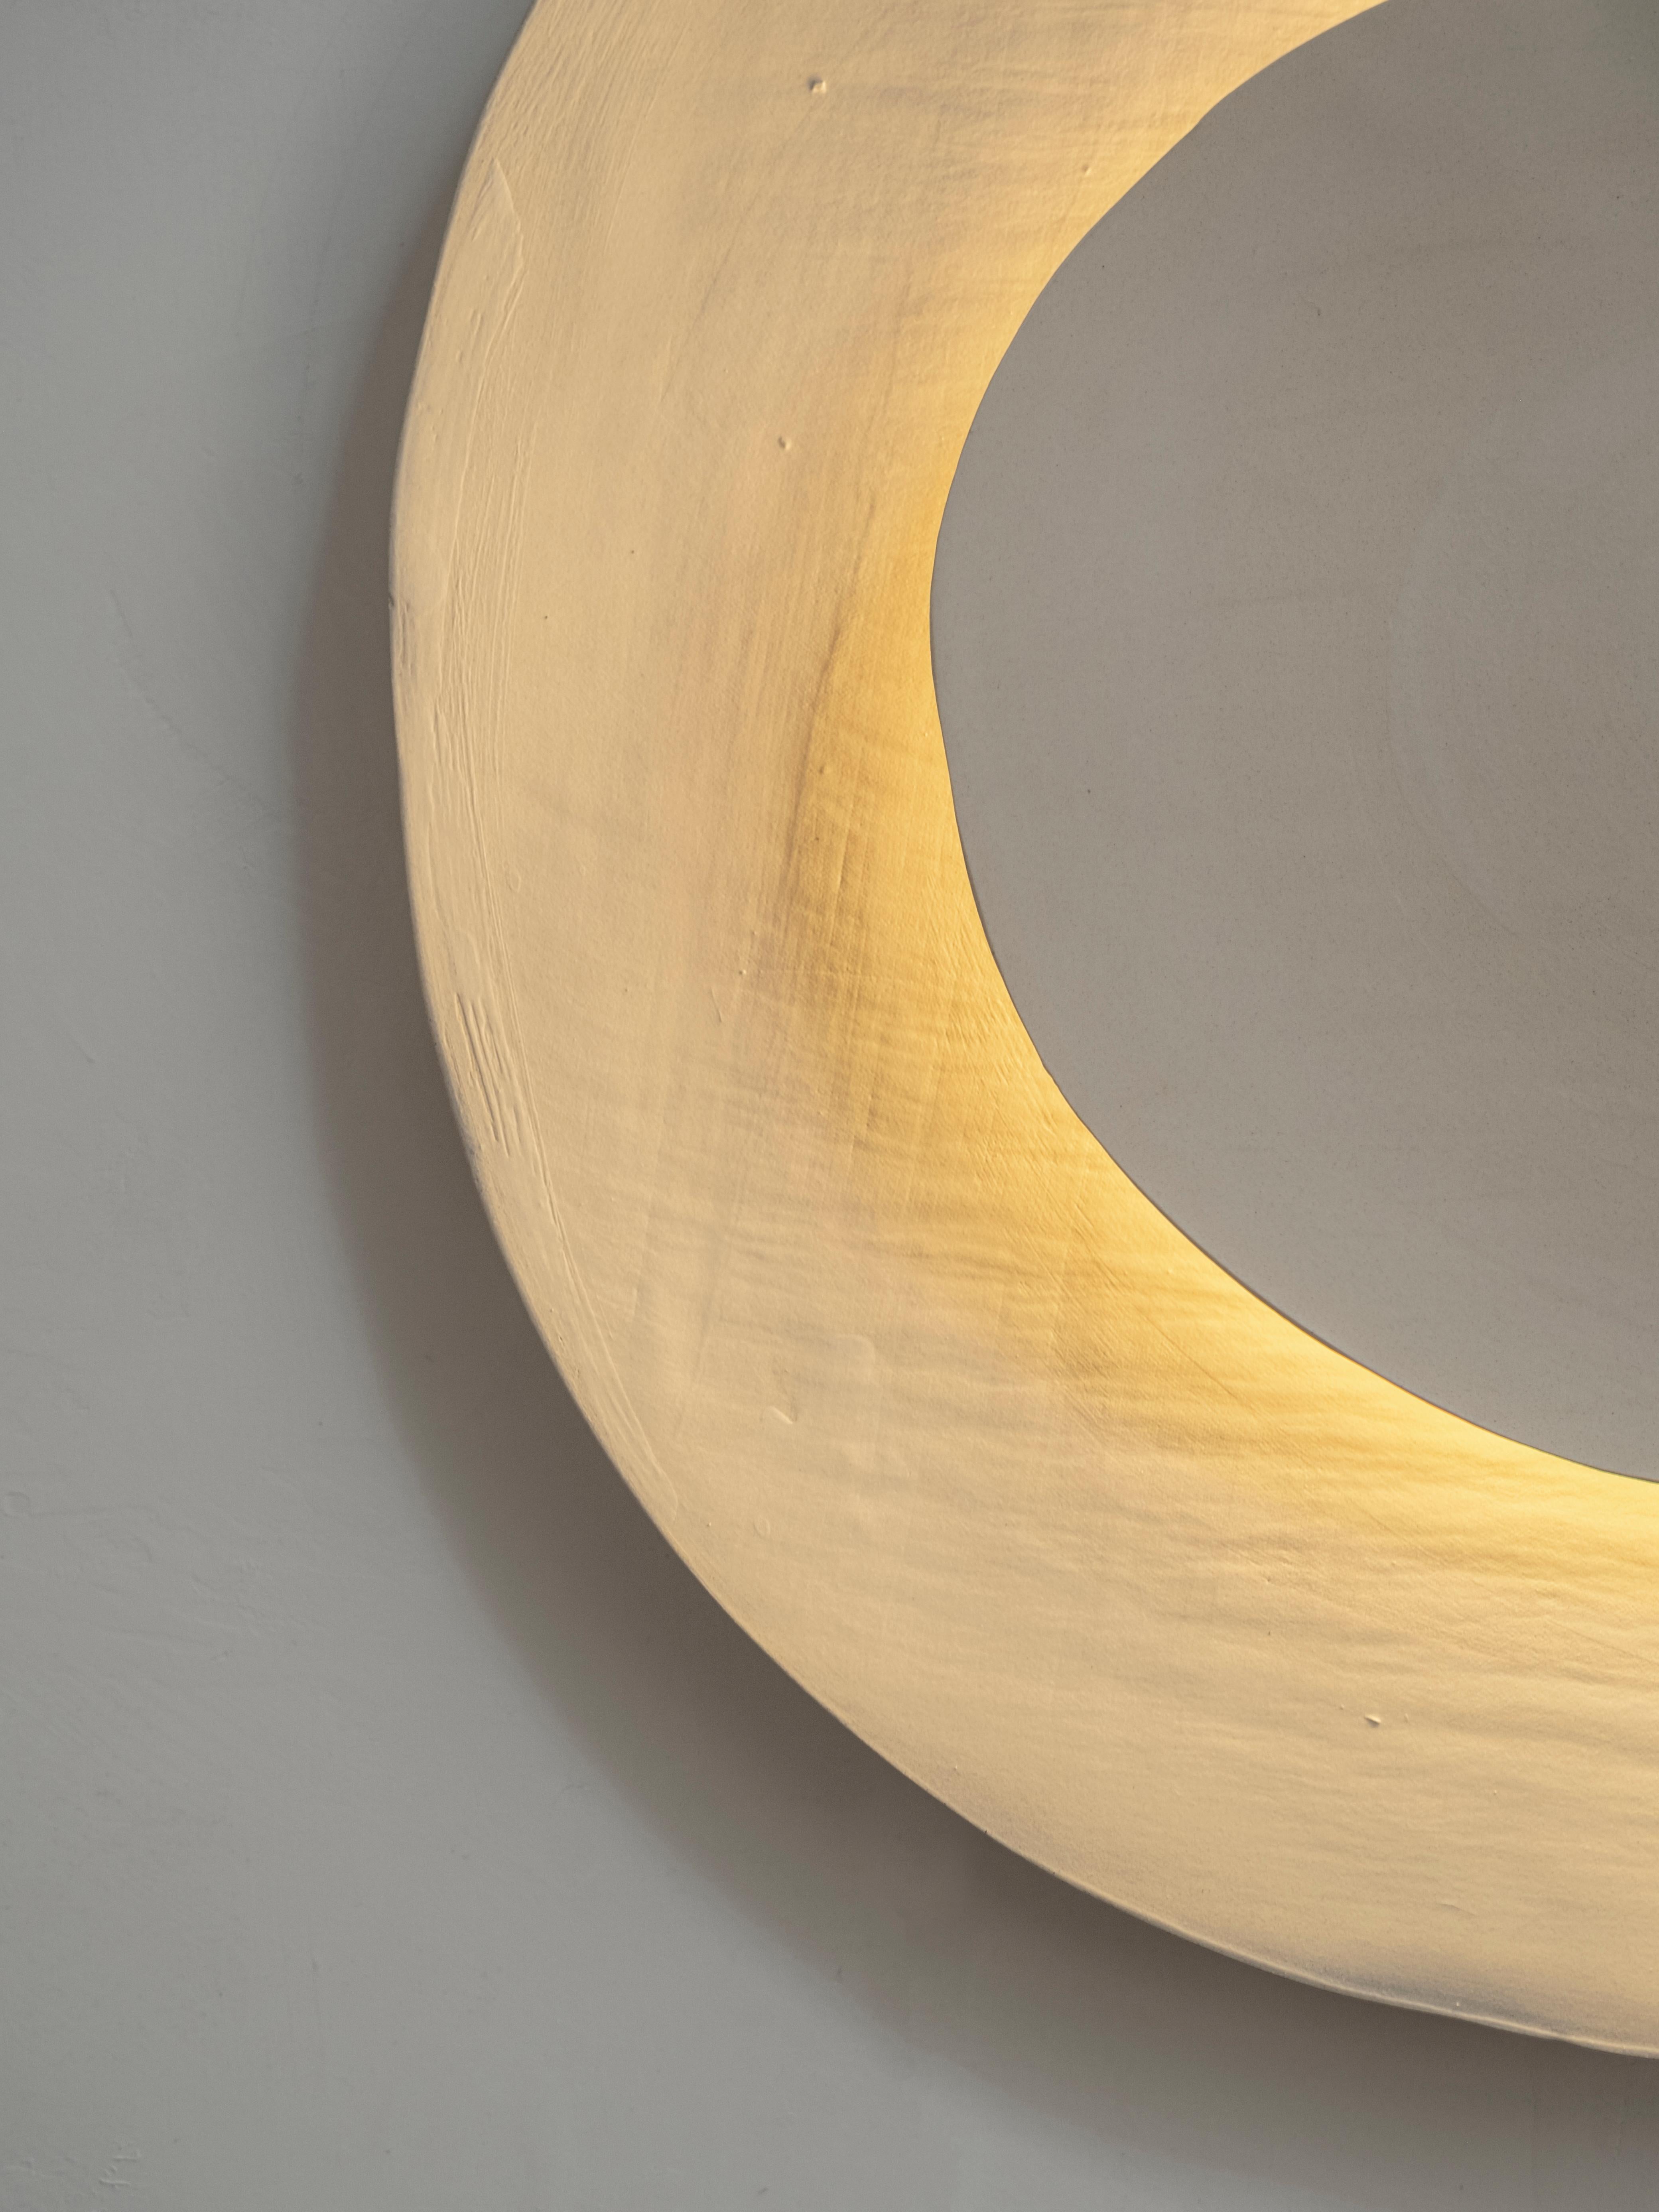 French Silk #13 Wall Light by Margaux Leycuras